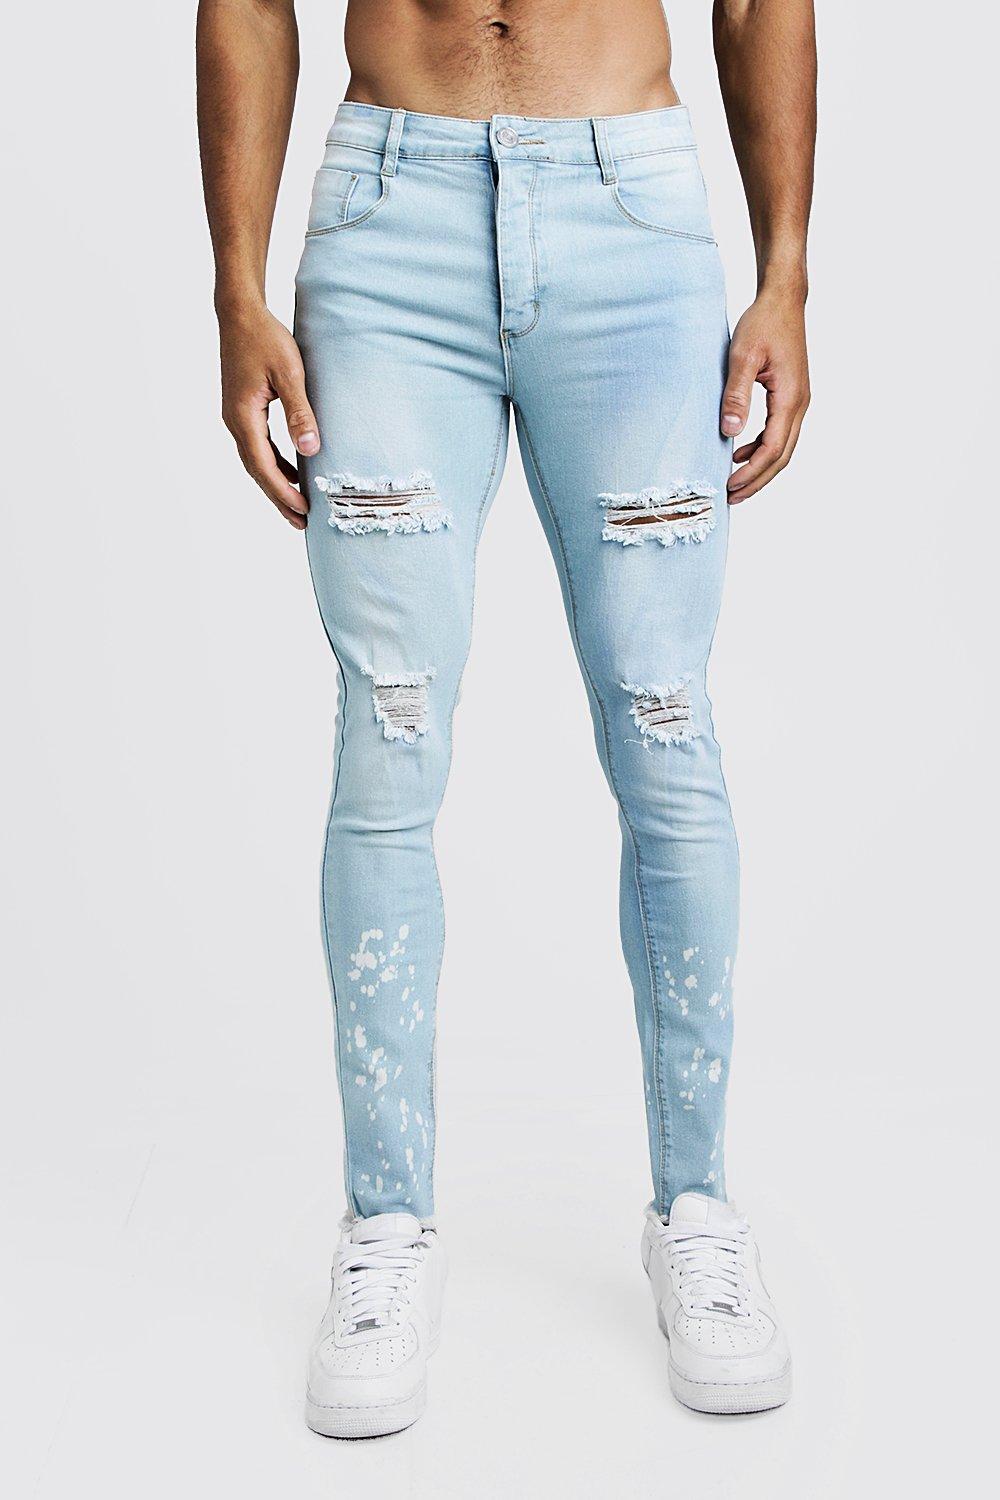 light ripped jeans